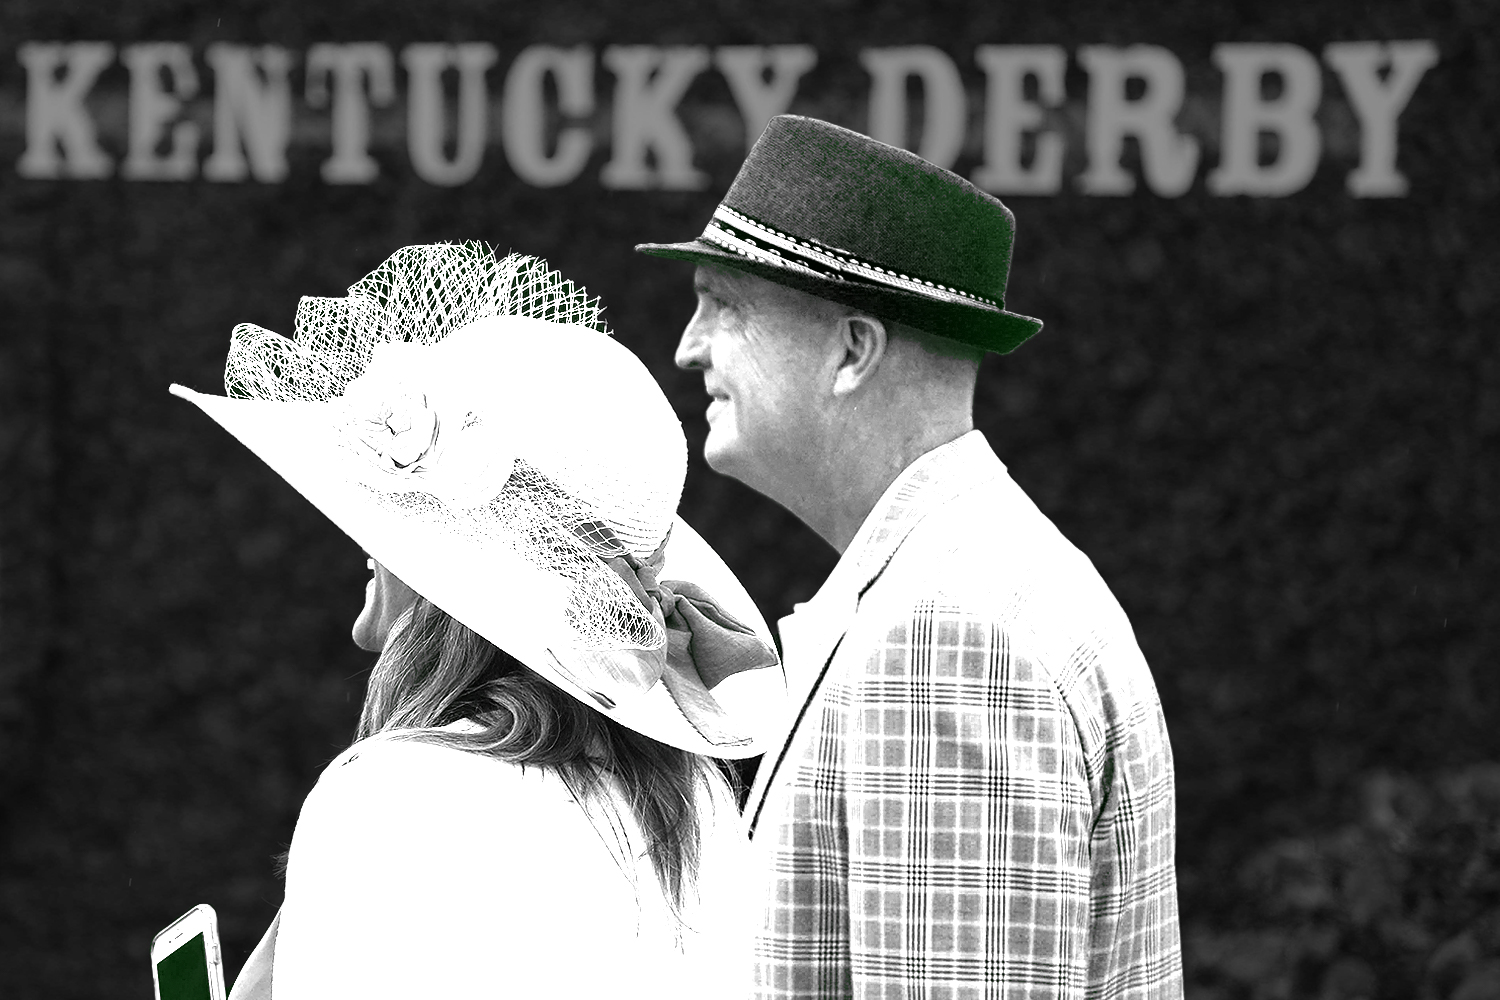 How Kentucky Derby Lures the Wealthy - Front Office Sports